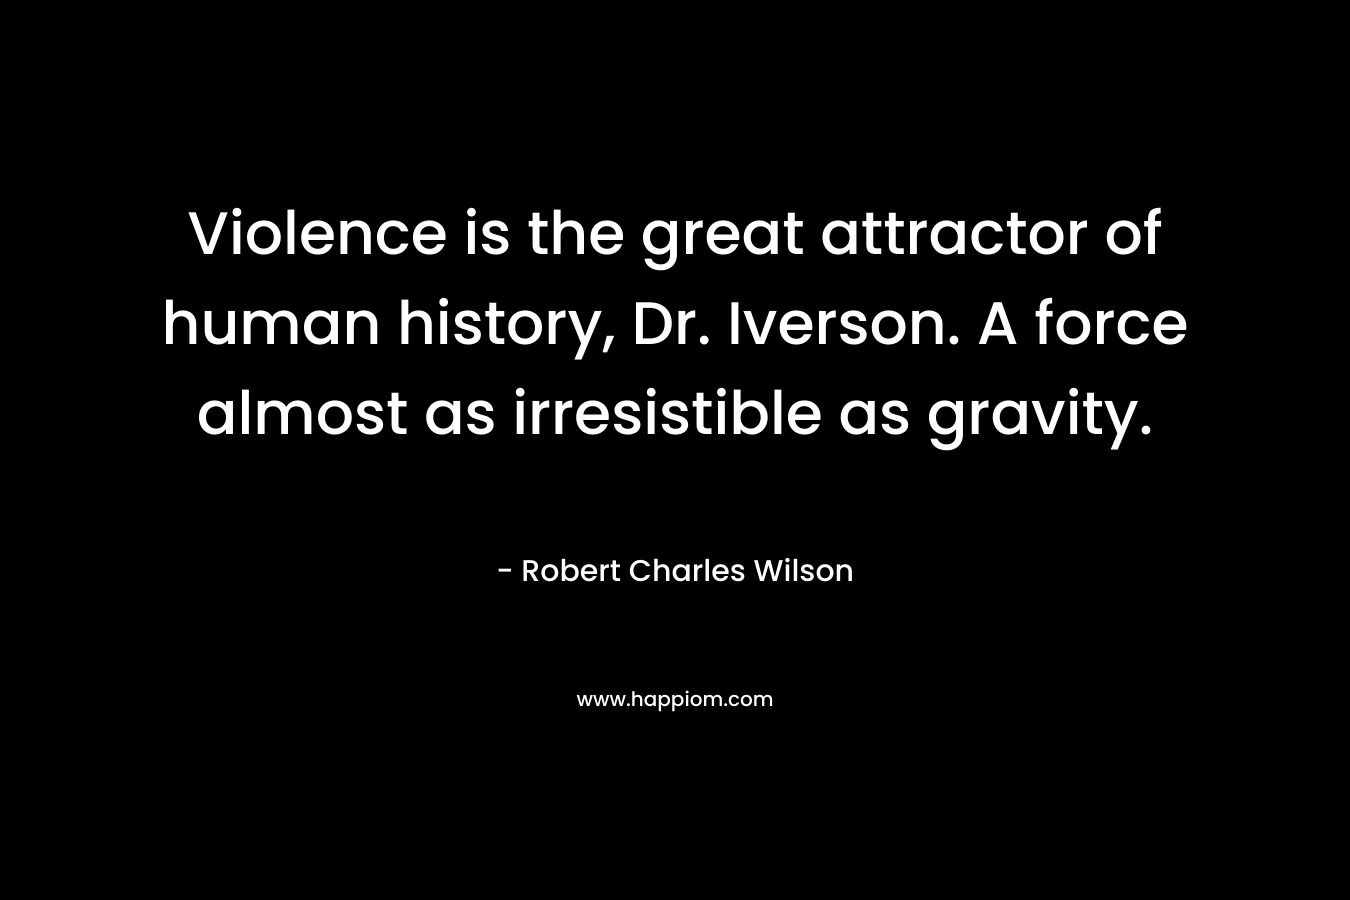 Violence is the great attractor of human history, Dr. Iverson. A force almost as irresistible as gravity.